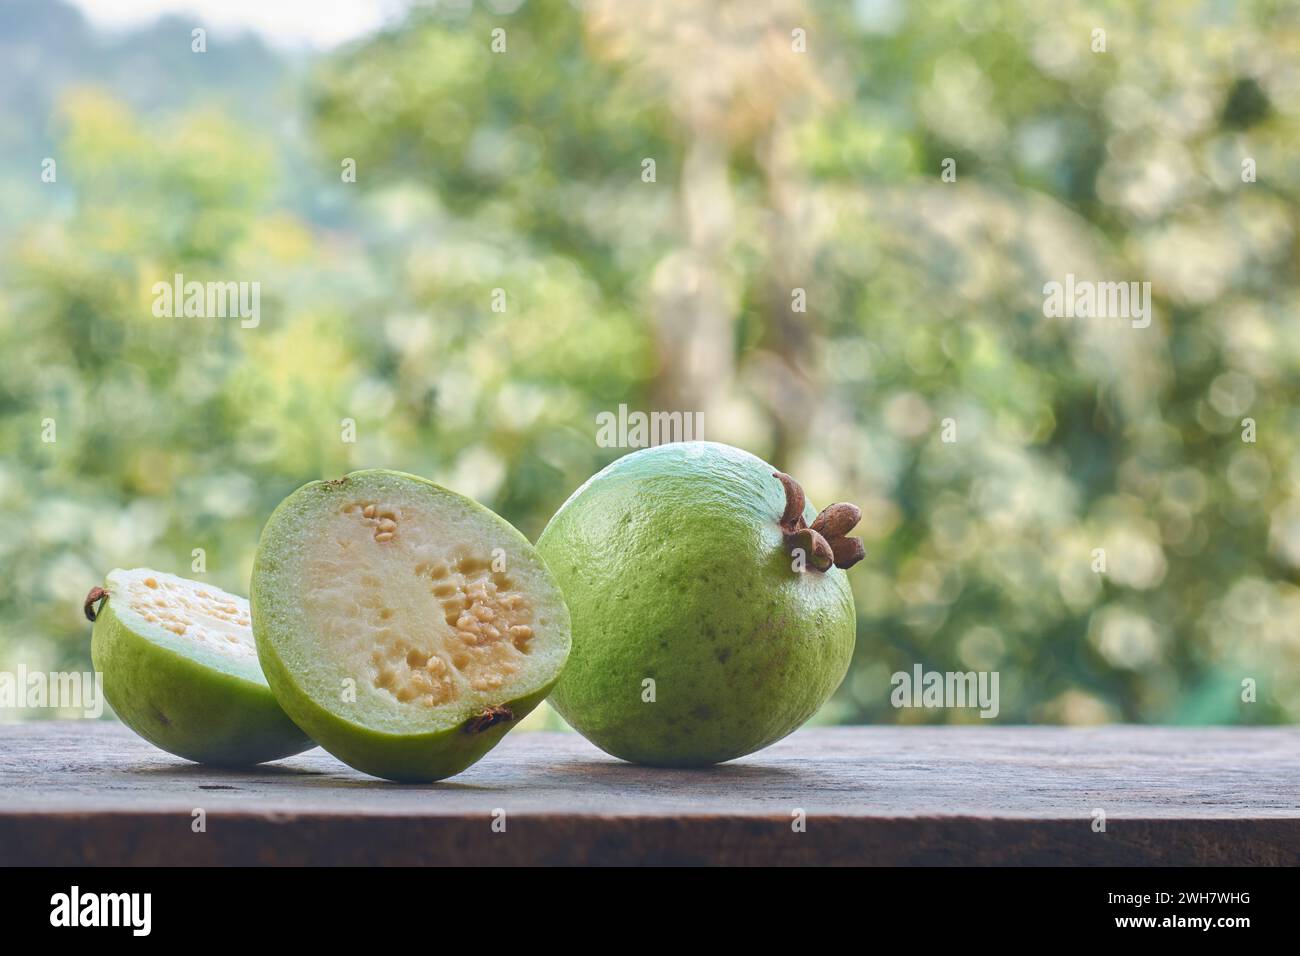 guava isolated on blurry garden background, oval shaped common tropical and nutrient-rich fruit that is high in vitamin c, fiber and antioxidants Stock Photo